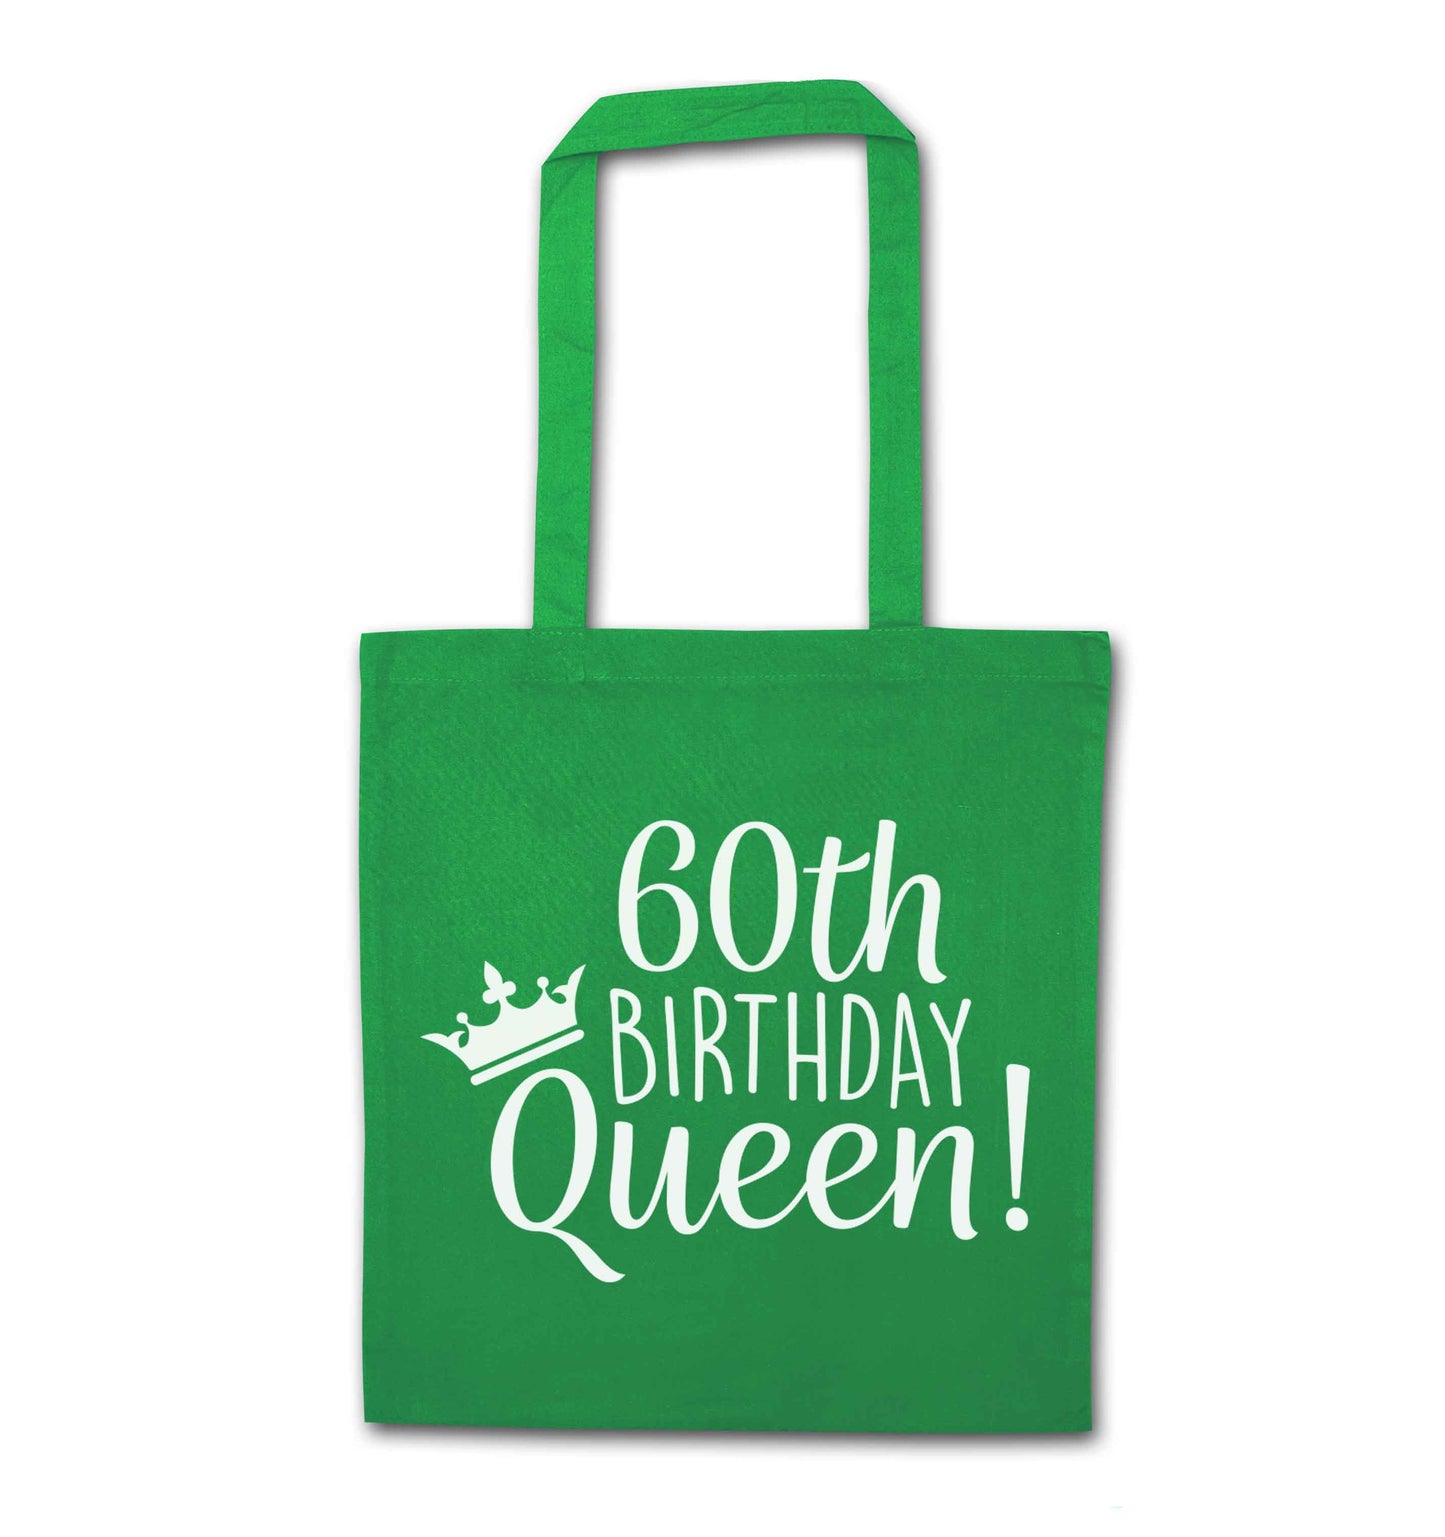 60th birthday Queen green tote bag